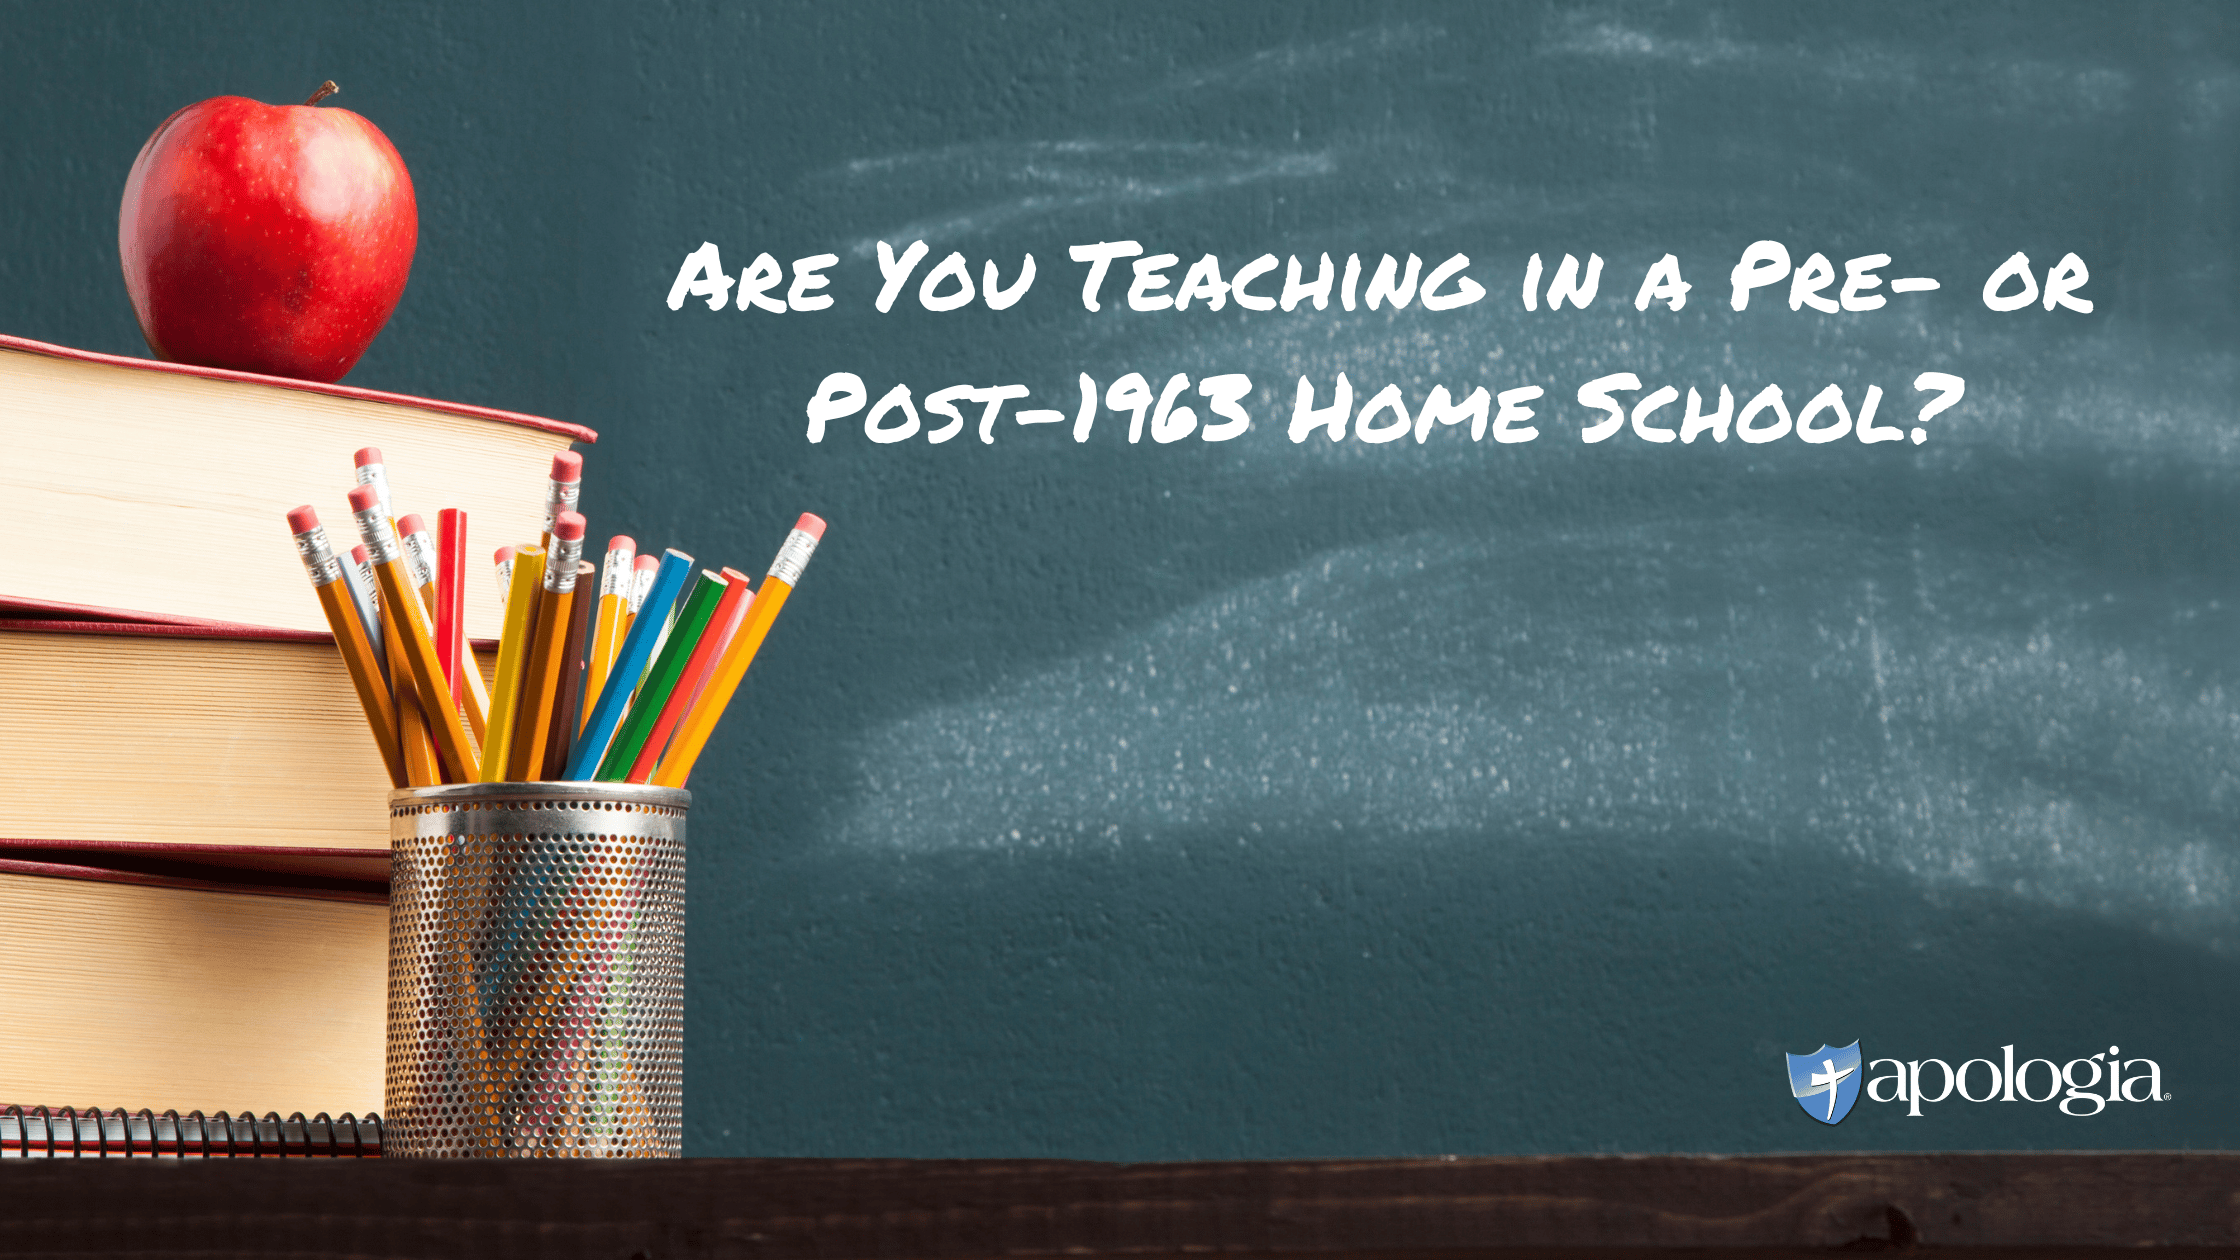 Are You Teaching in a Pre- or Post-1963 Home School?